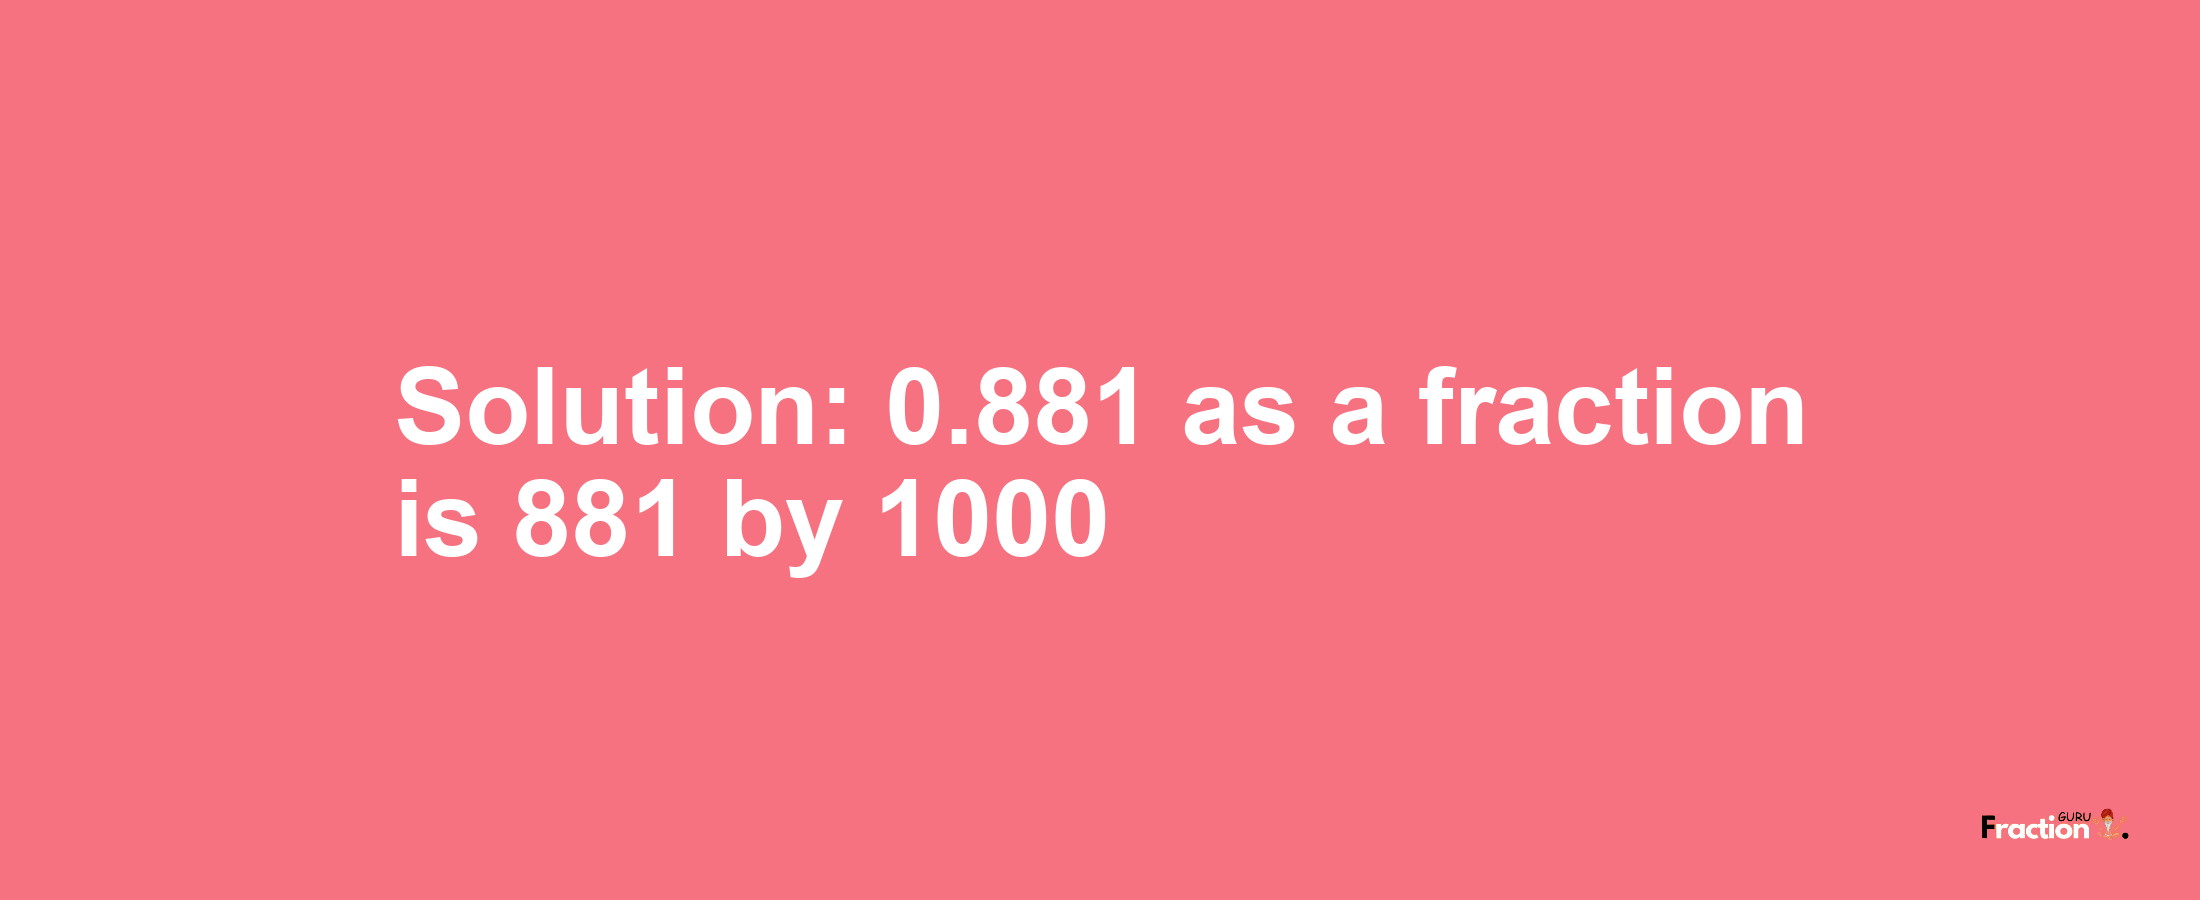 Solution:0.881 as a fraction is 881/1000